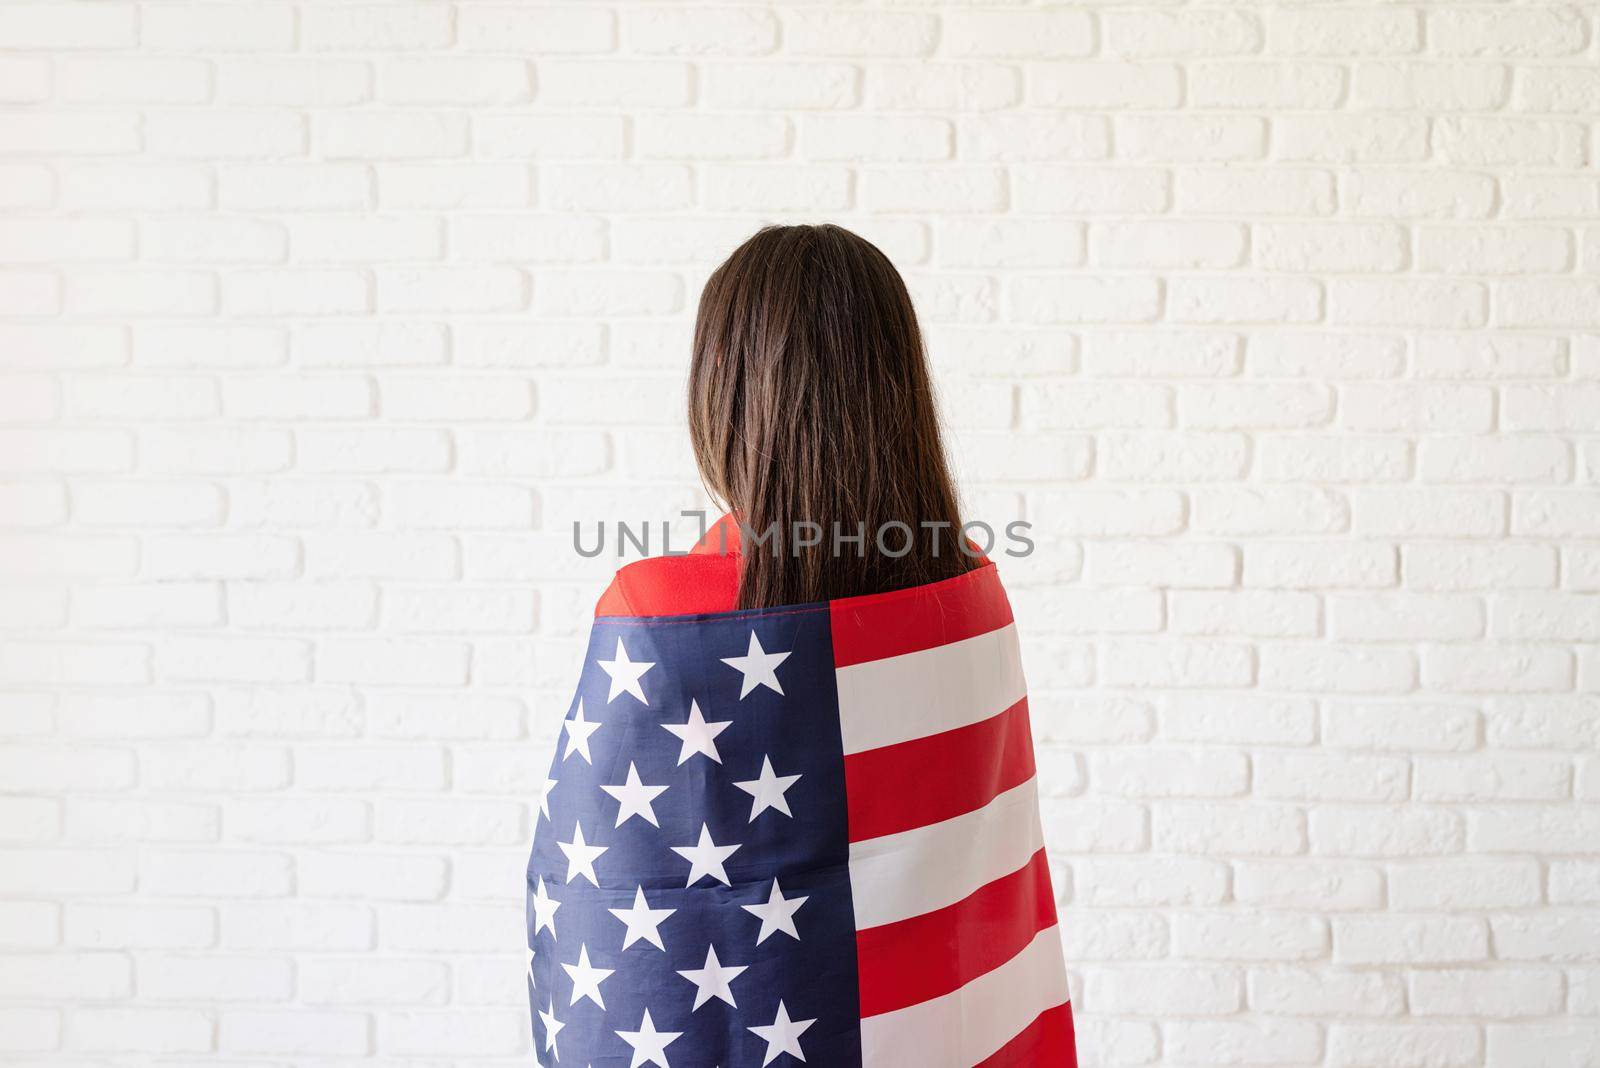 Independence day of the USA. Happy July 4th. Young smiling woman with national flag of the USA, rear view